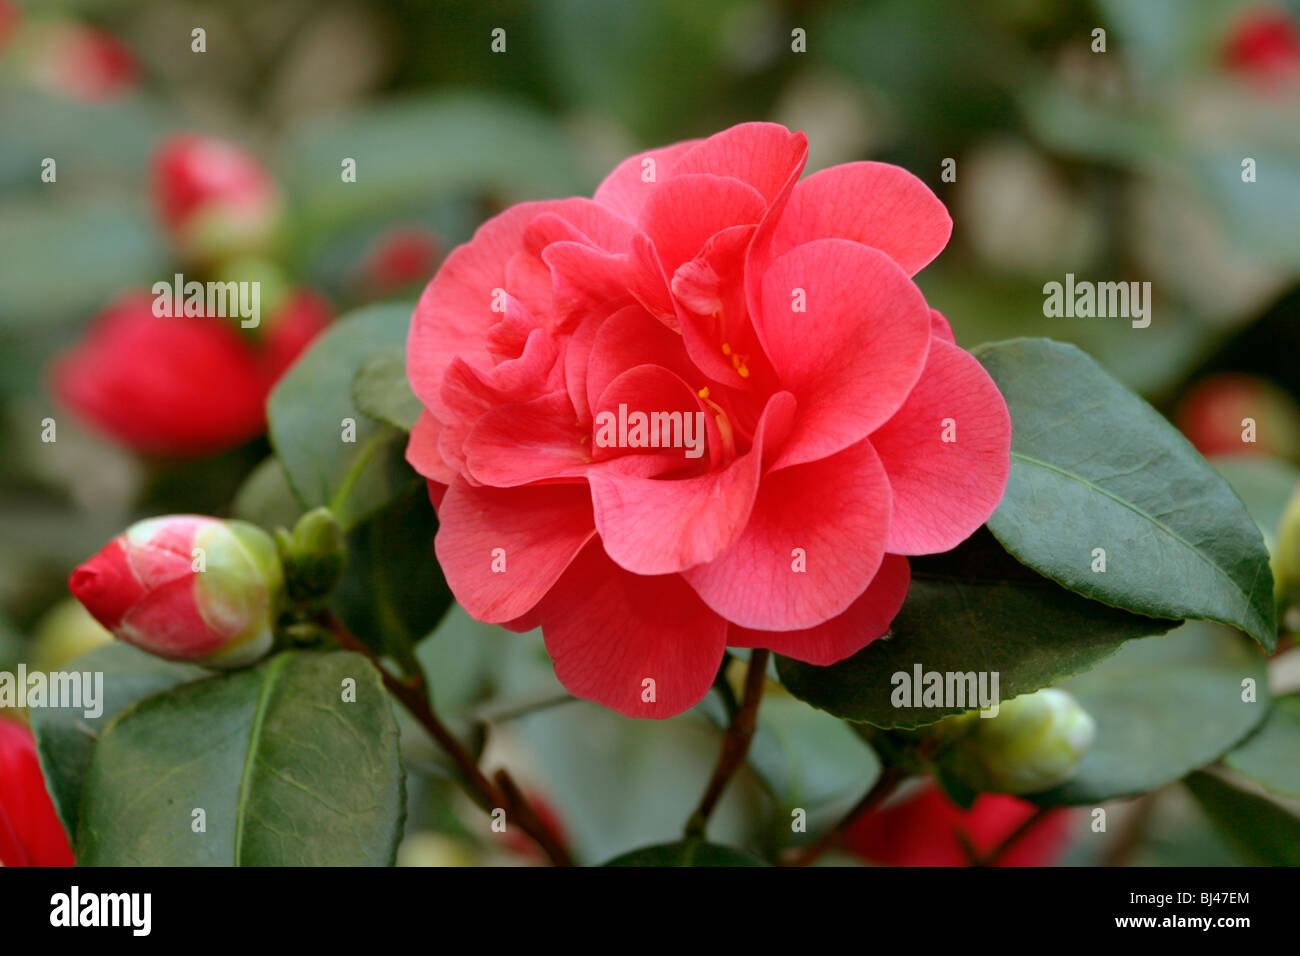 Flowering Camellia (Camellia japonica) of the variety Lady Campbell Stock Photo